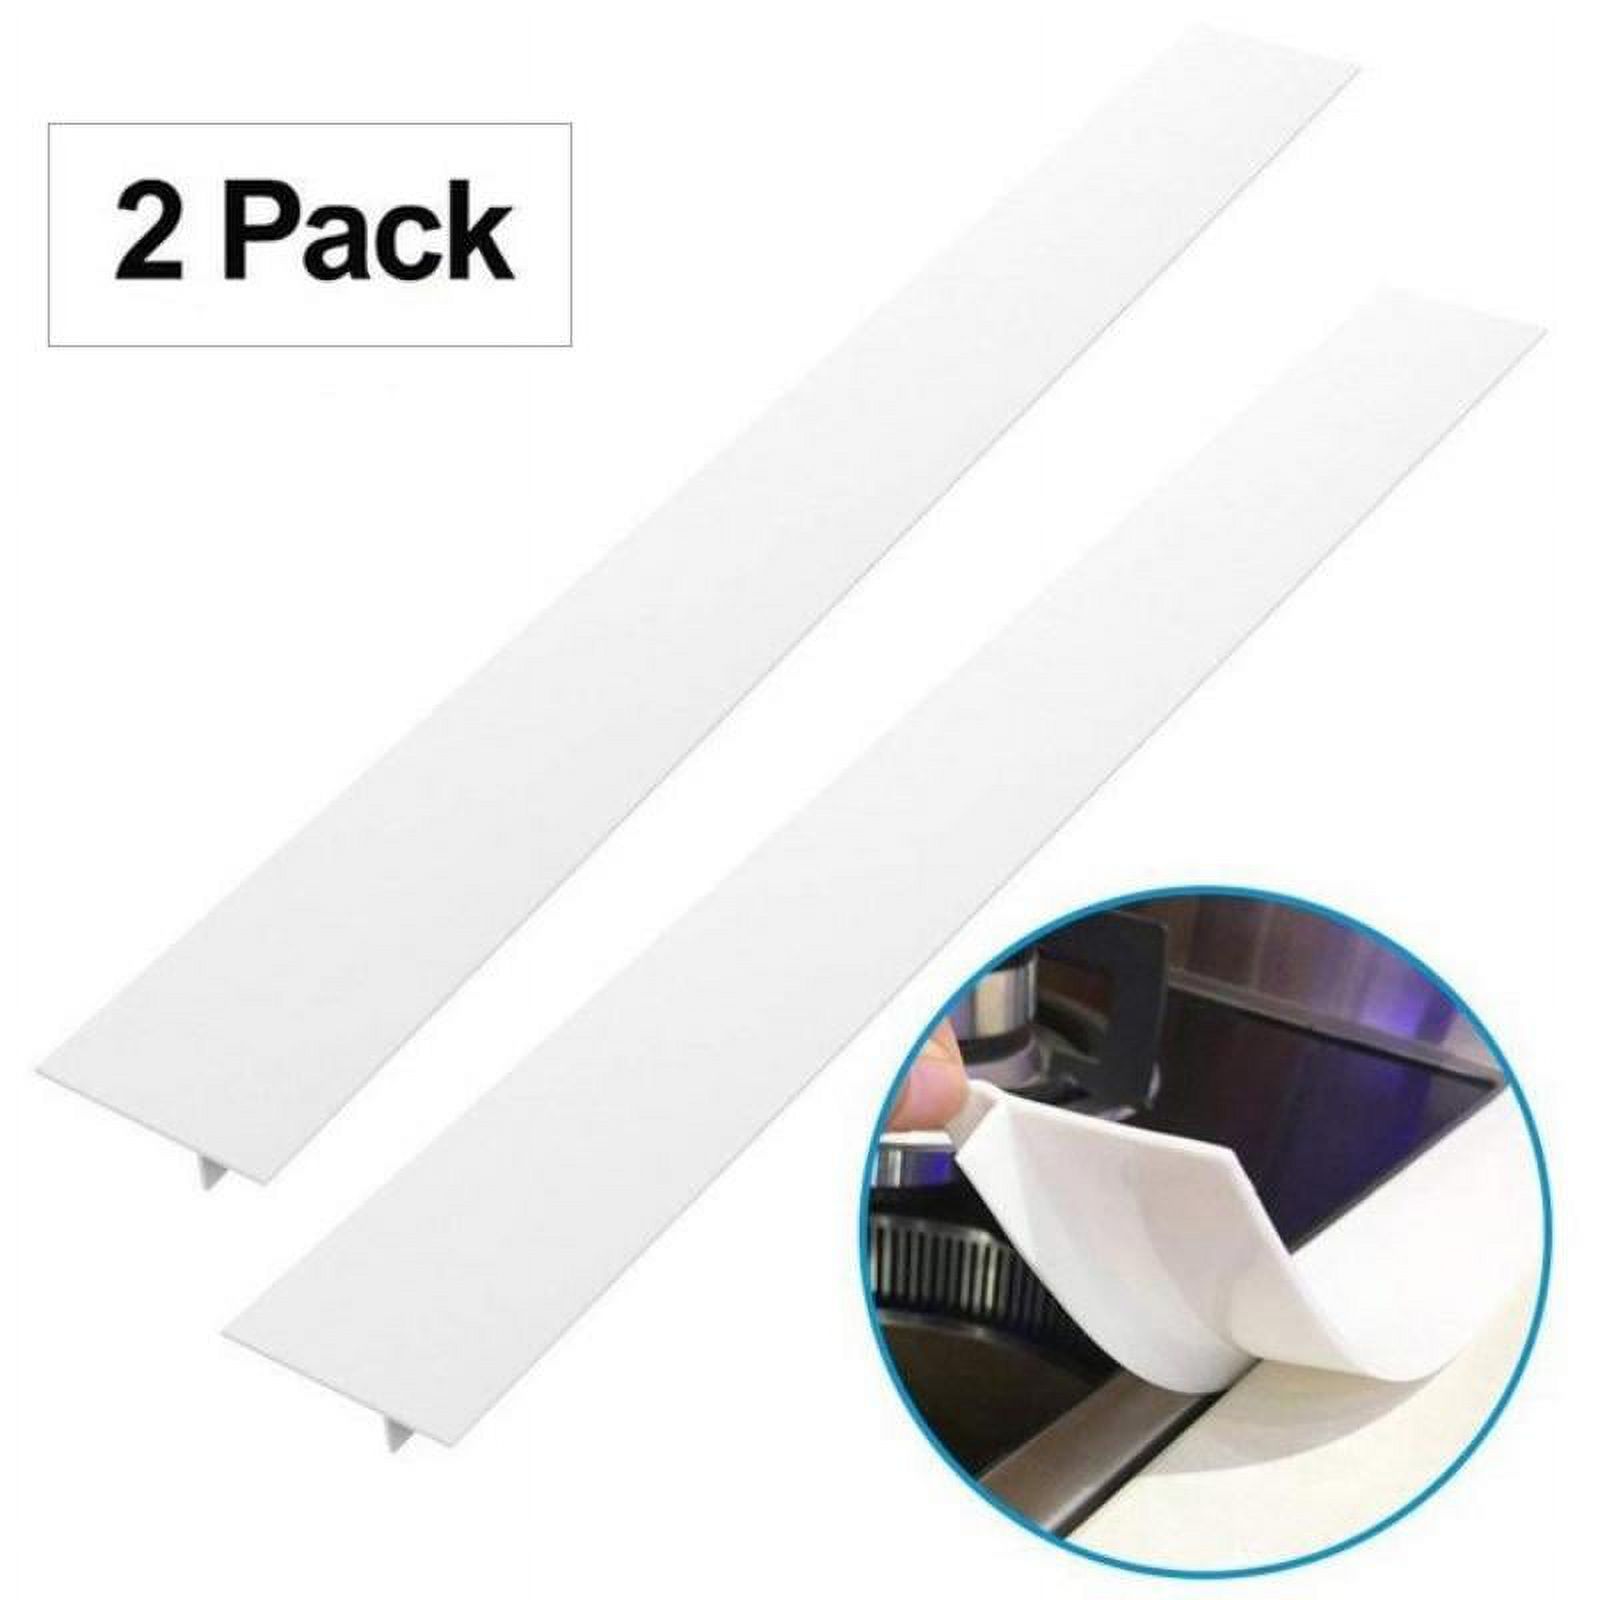 Stove Counter Gap Cover, Long Silicone Gap Cover, Gap Filler for Oven Protector, Countertop, Kitchen Appliances, Set of 2 - image 1 of 5